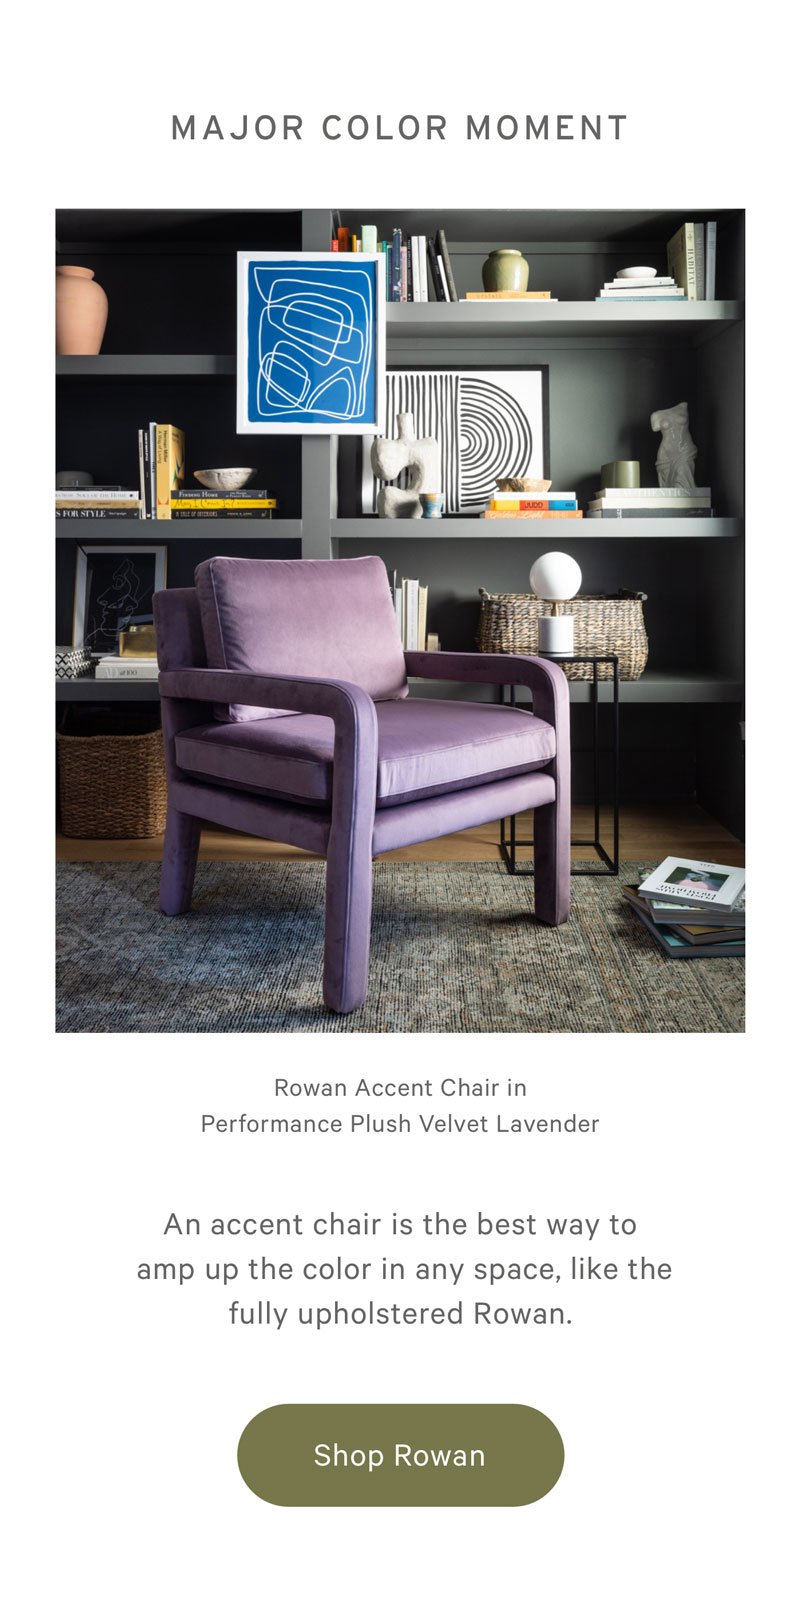 MAJOR COLOR MOMENT An accent chair is the best way to amp up the color in any space, like the fully upholstered Rowan. 